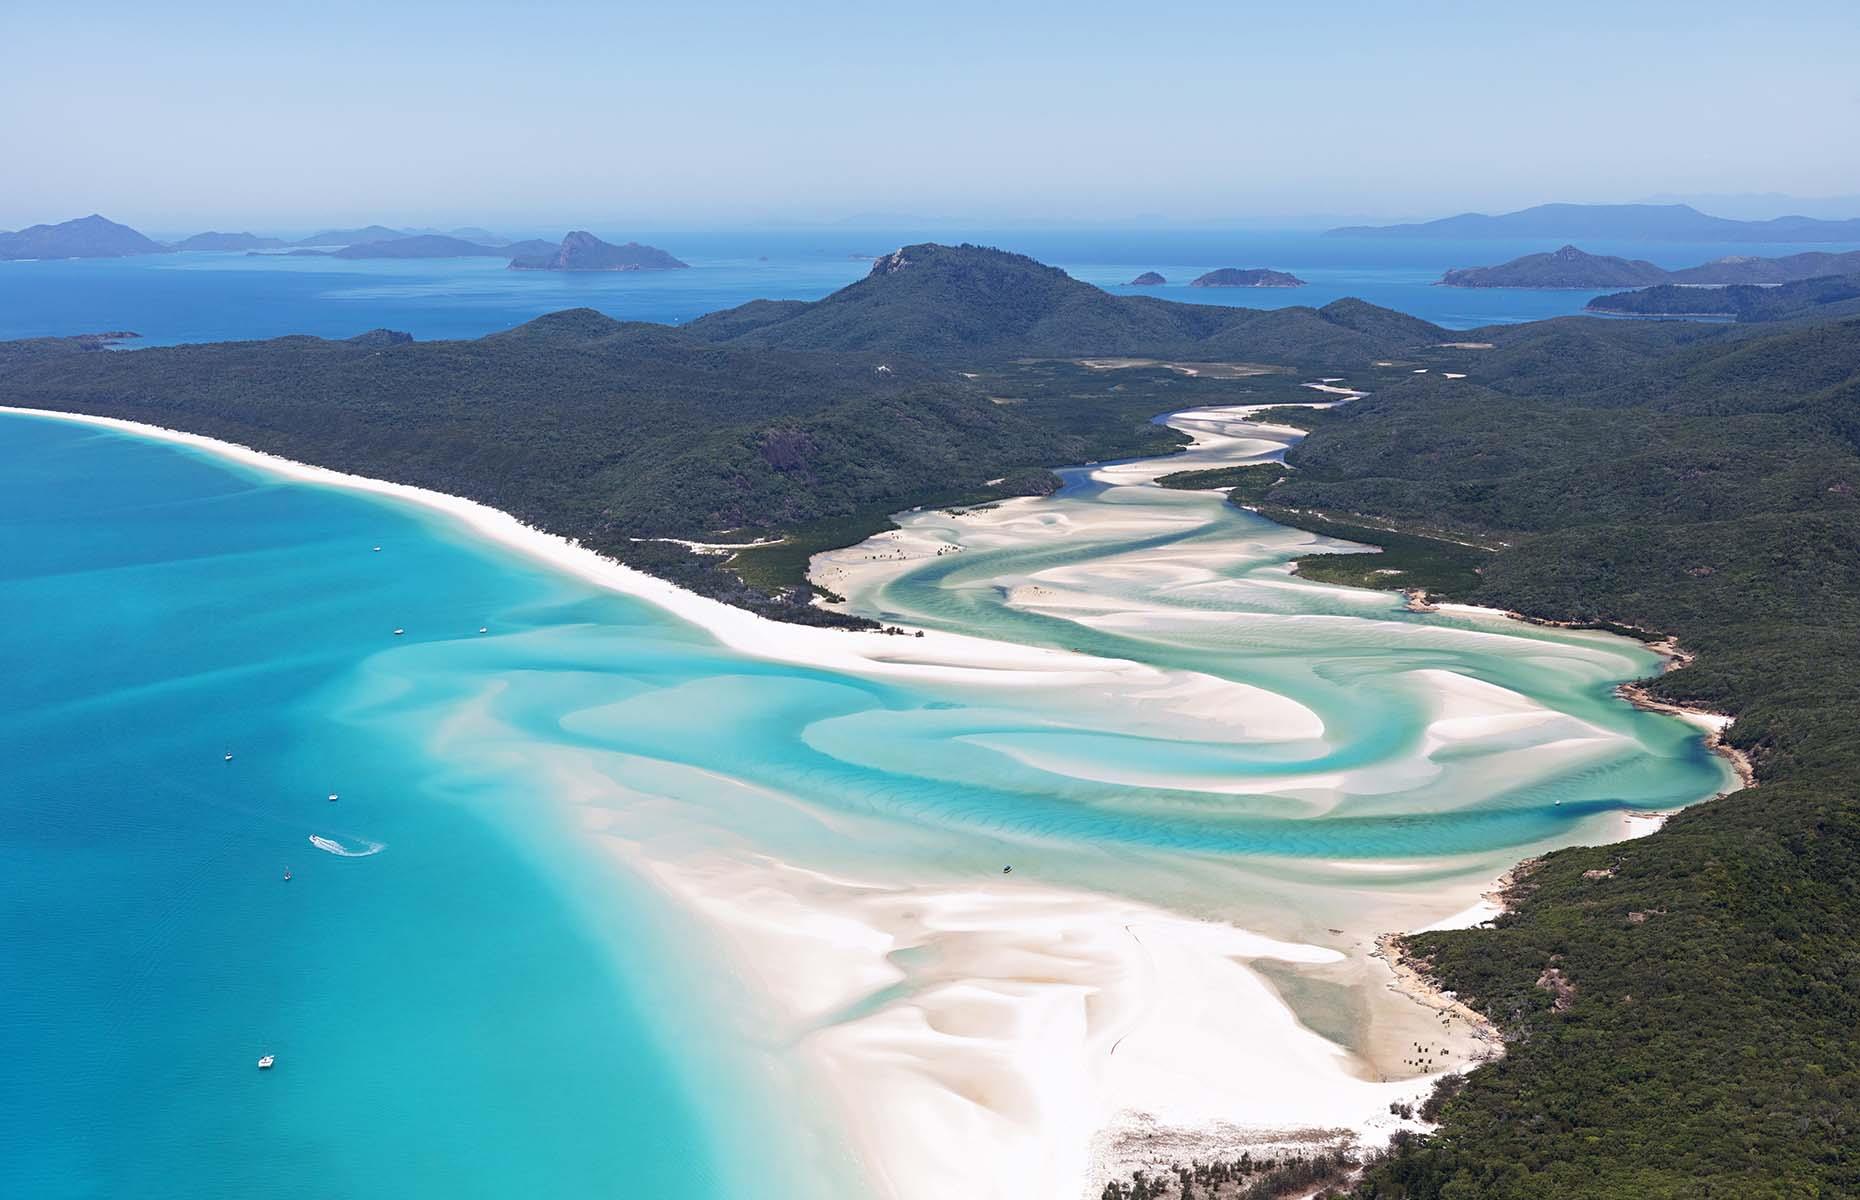 <p>A mesmerising swirl of bright white silica sand and striking azure waters located in the heart of the Great Barrier Reef, the Whitsundays certainly look like paradise on Earth. It’s not hard to see why the 4.3-mile long (7km) Whitehaven Beach, captured from above in this stunning shot, has been showered with awards and typically attracts visitors from all over the world.</p>  <p><a href="https://www.loveexploring.com/galleries/96347/the-worlds-empty-and-beautiful-beaches-from-above"><strong>Take a look at the world's most beautiful beaches from above</strong></a></p>